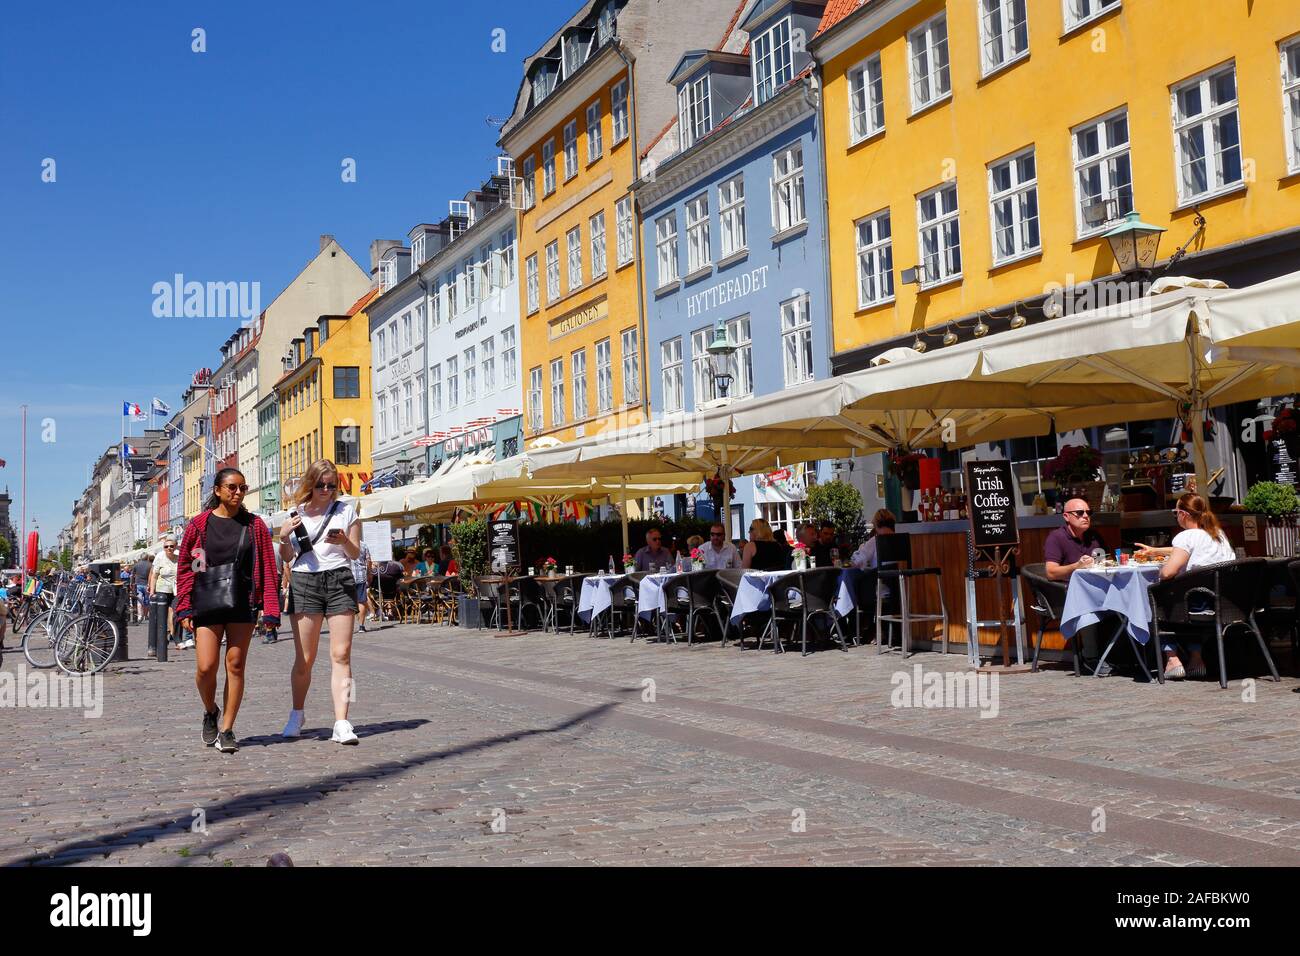 Copenhagen, Denmark - June 27, 2018: Street view of the Nyhavn pedestrians only street with its restaurants an colorful old buildings. Stock Photo